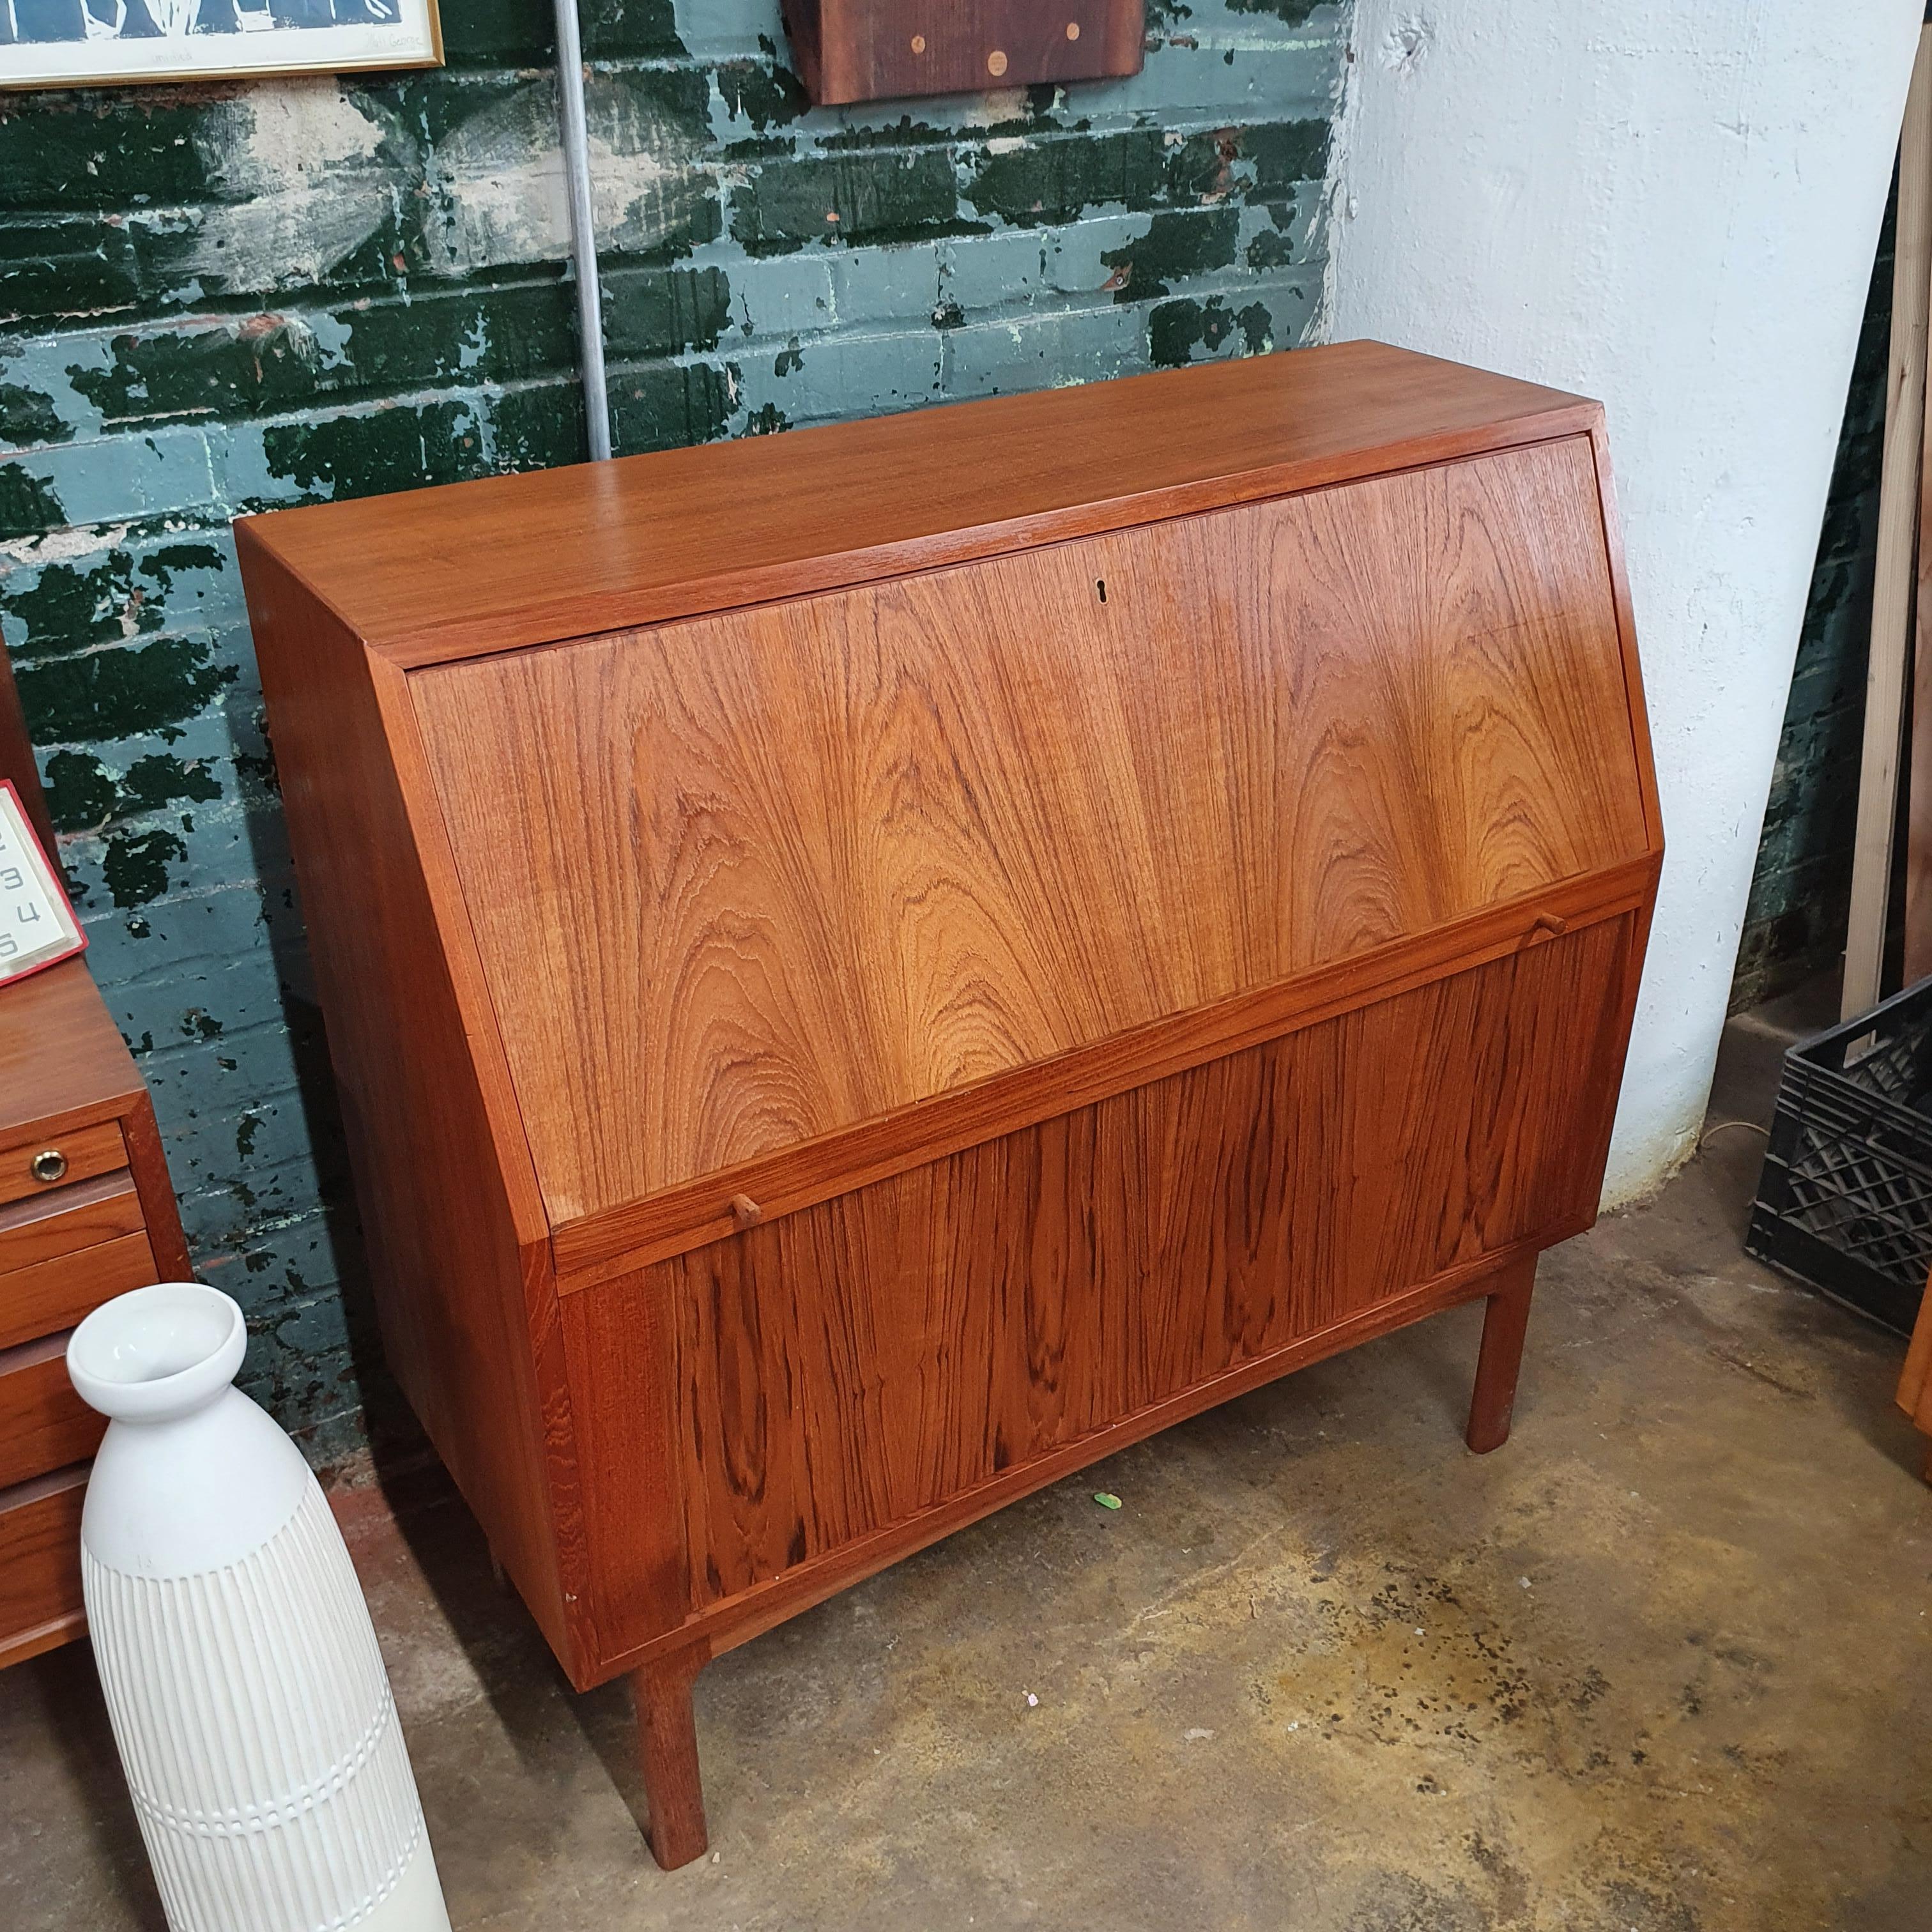 Beautiful teak secretary desk with tambour door by Bernhard Pedersen and Son. BPS. Drop front desk with 4 drawers inside. Some pictures shows desk on moving castors, not included.